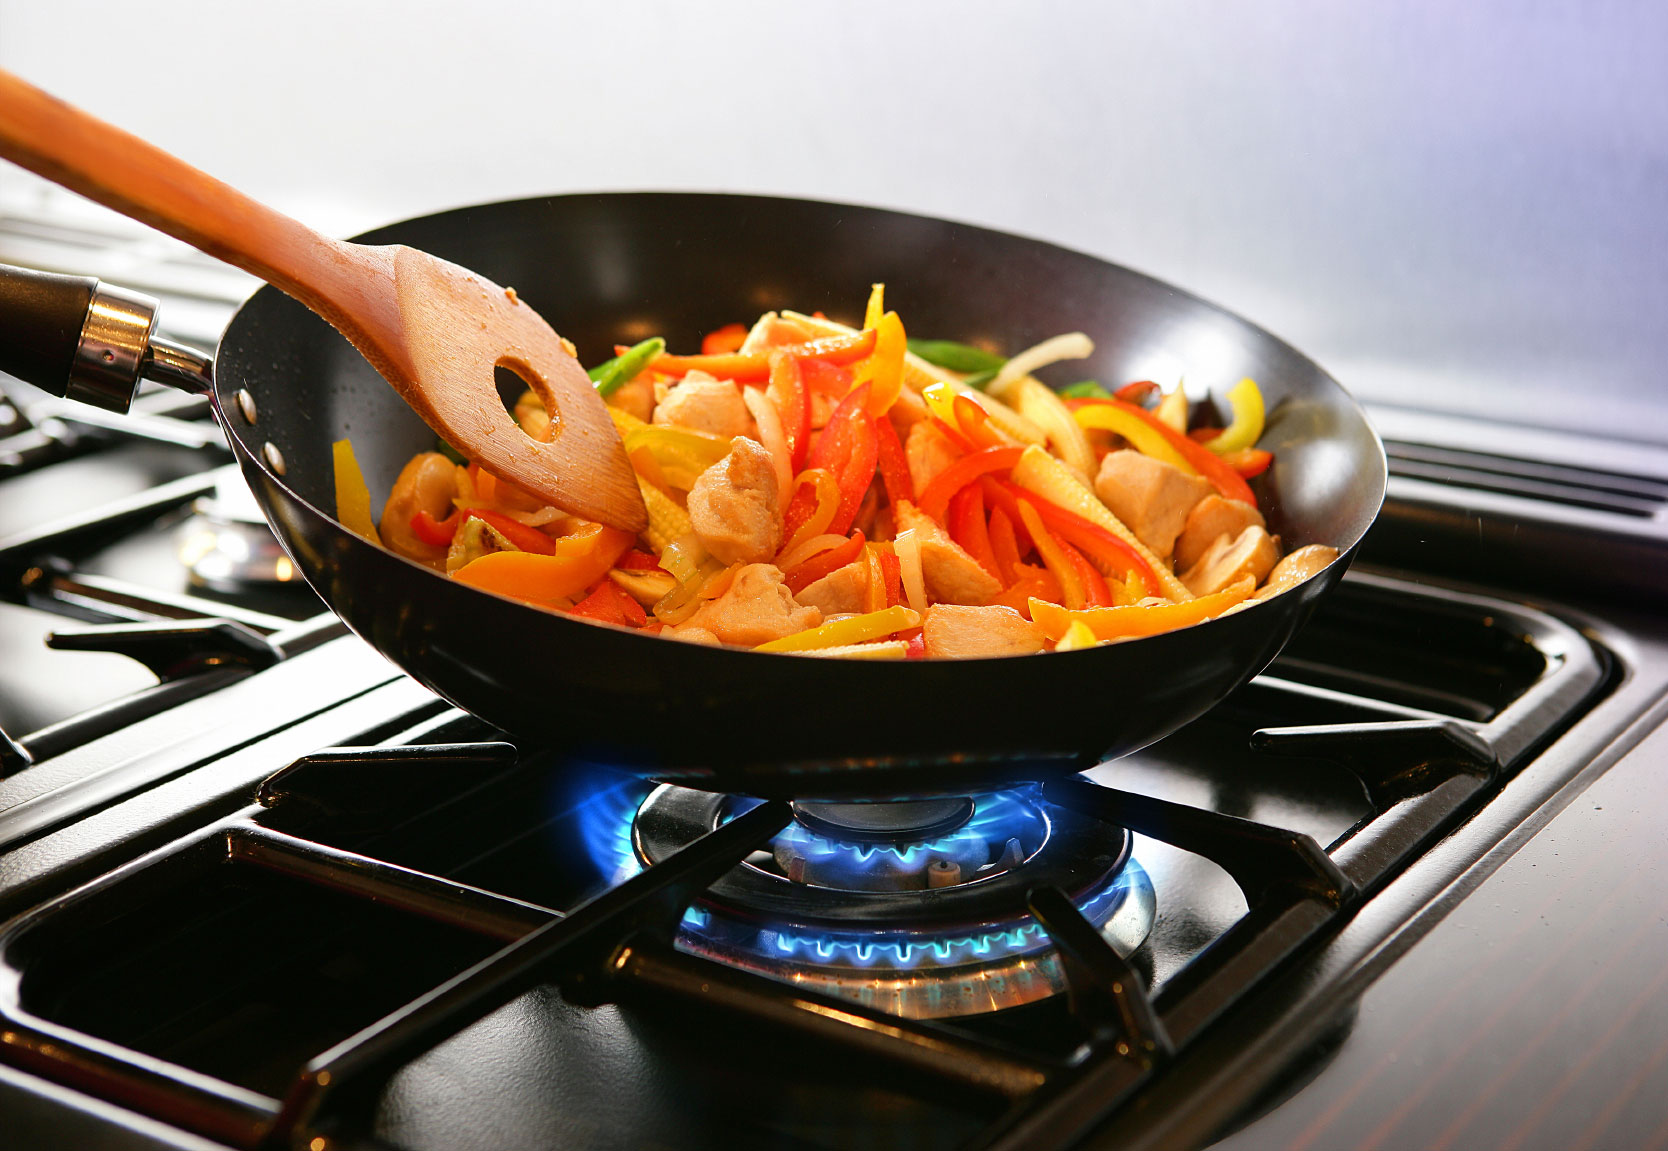 Meal being fried on a pan